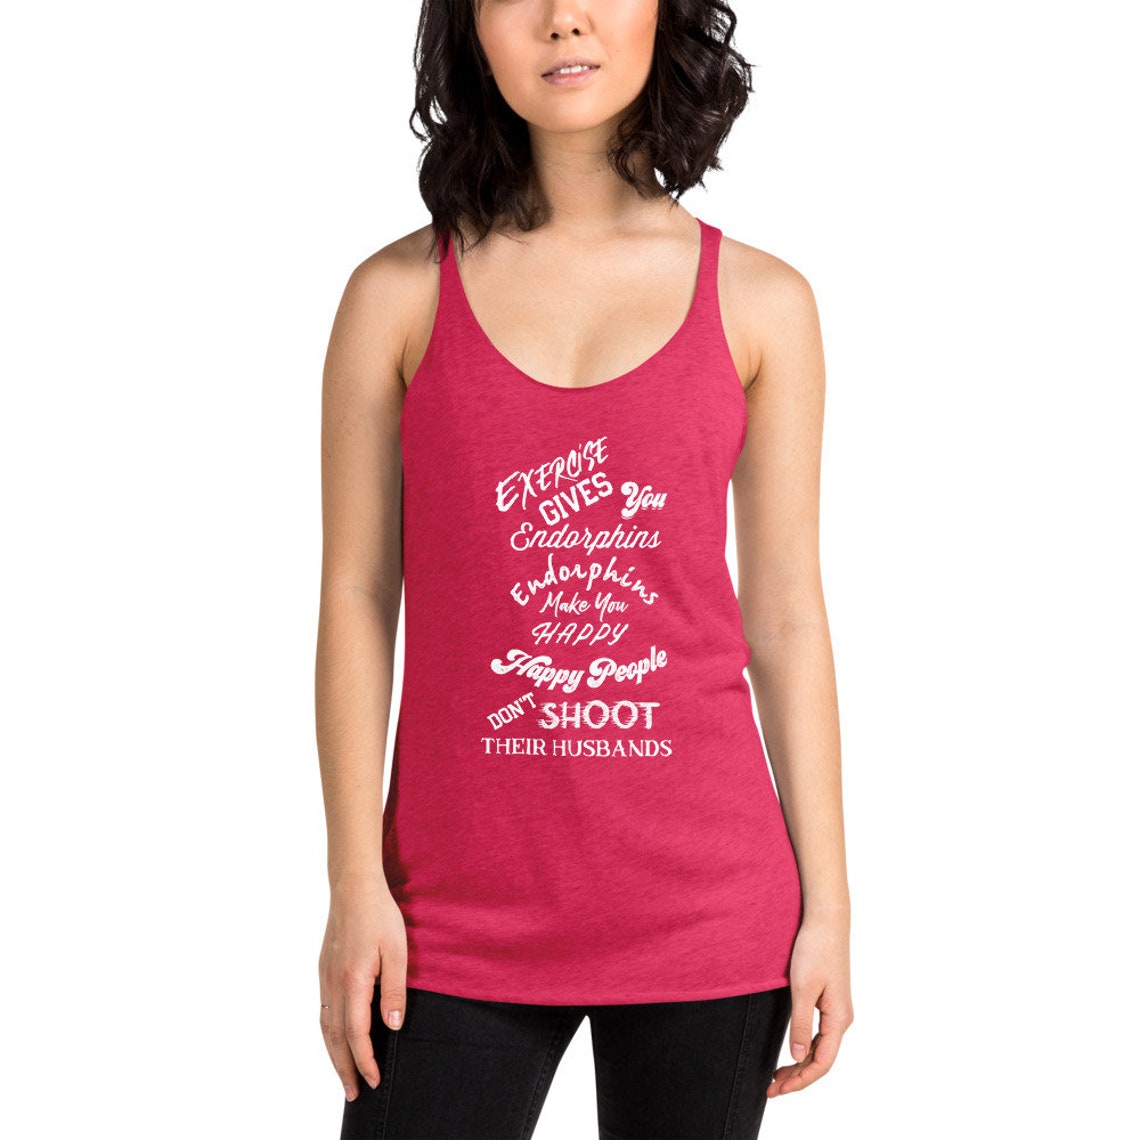 Legally Blonde Endorphins Make You Happy Elle Woods Funny - Etsy